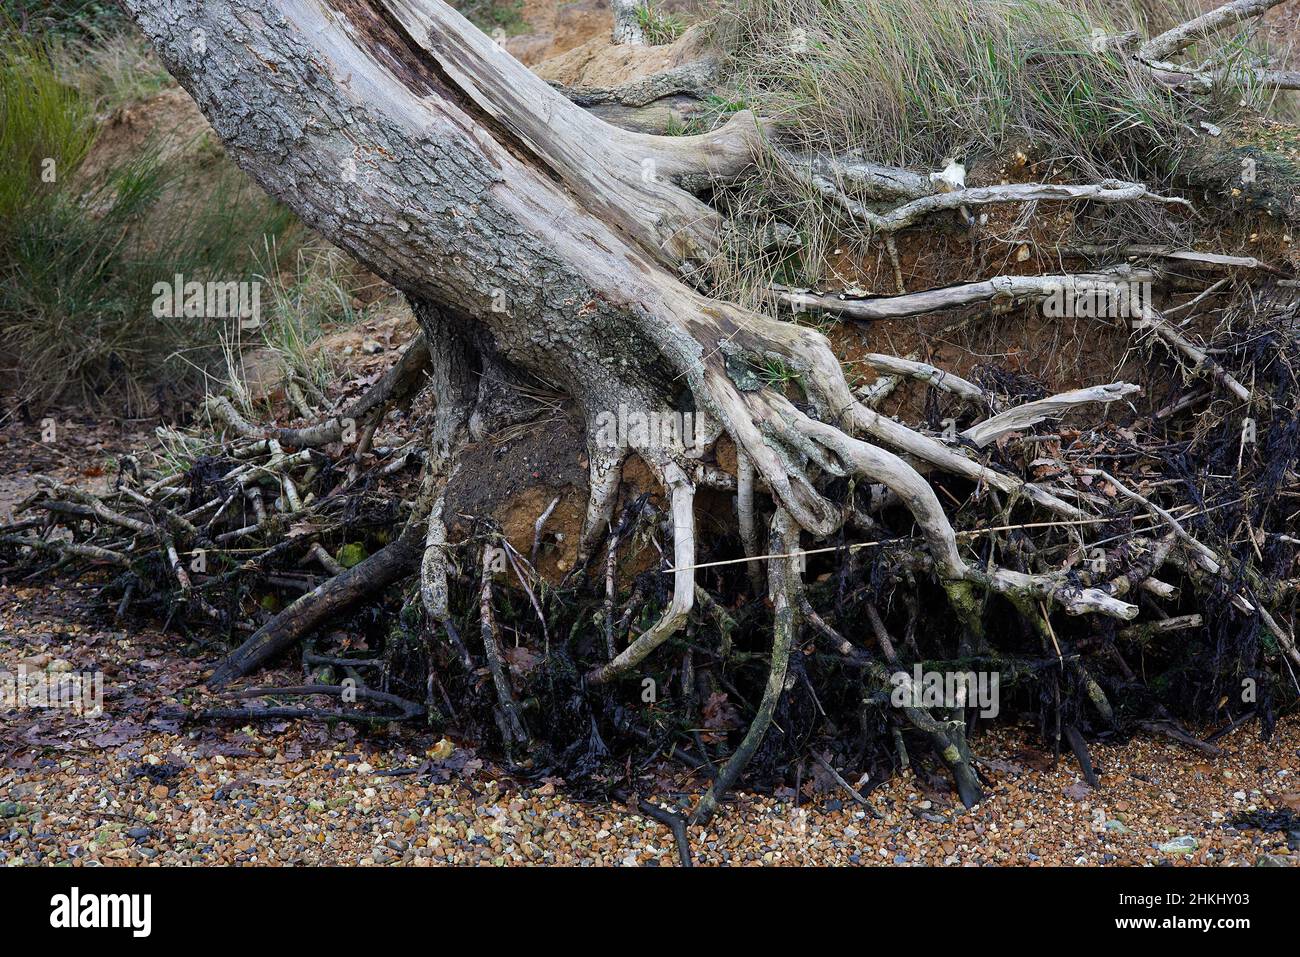 Trees clinging with their roots despite the washed away soil due to low level coastal erosion. Stock Photo